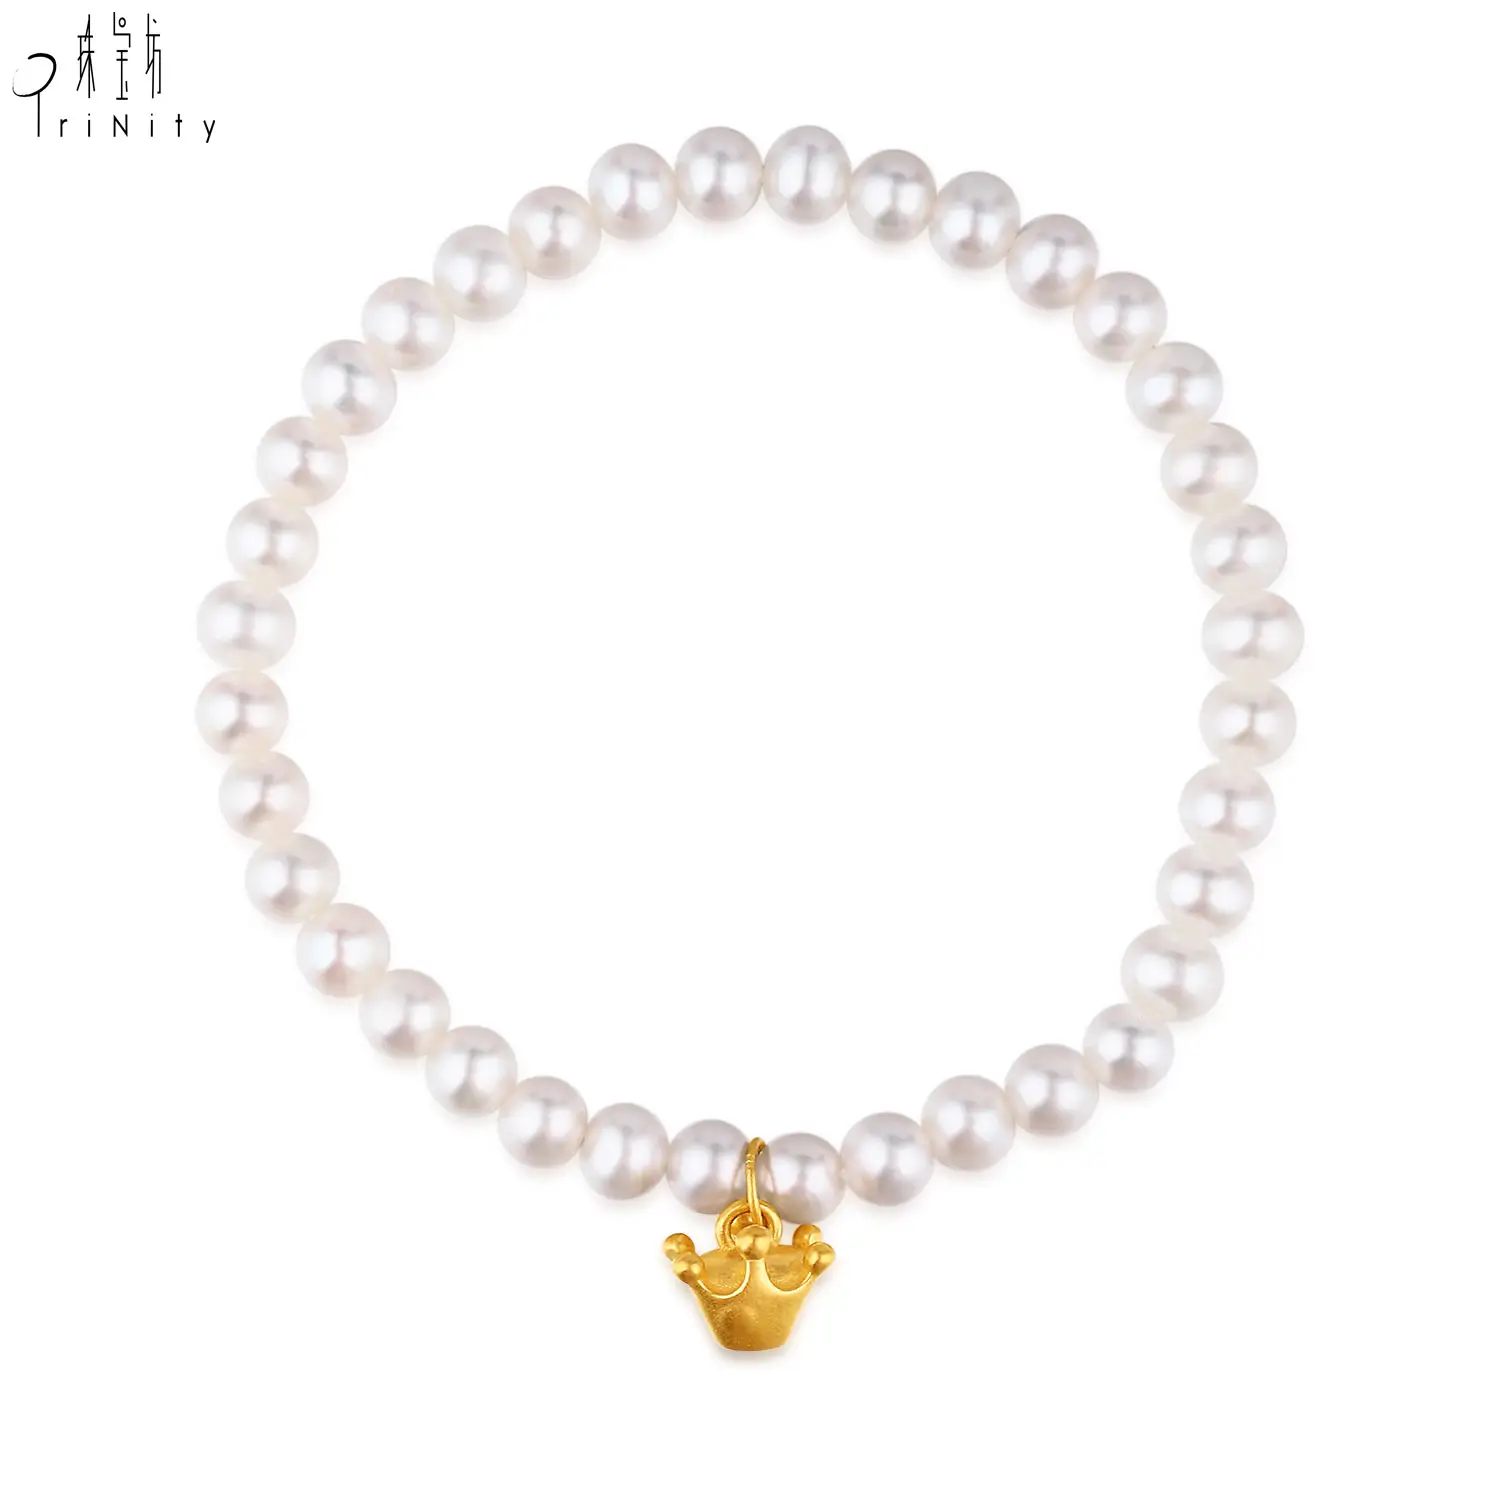 New Arrival Most Popular Hot Sale Jewelry 24K Pure Gold Crown Pendant Real Natural Pearl Bracelets For Girls